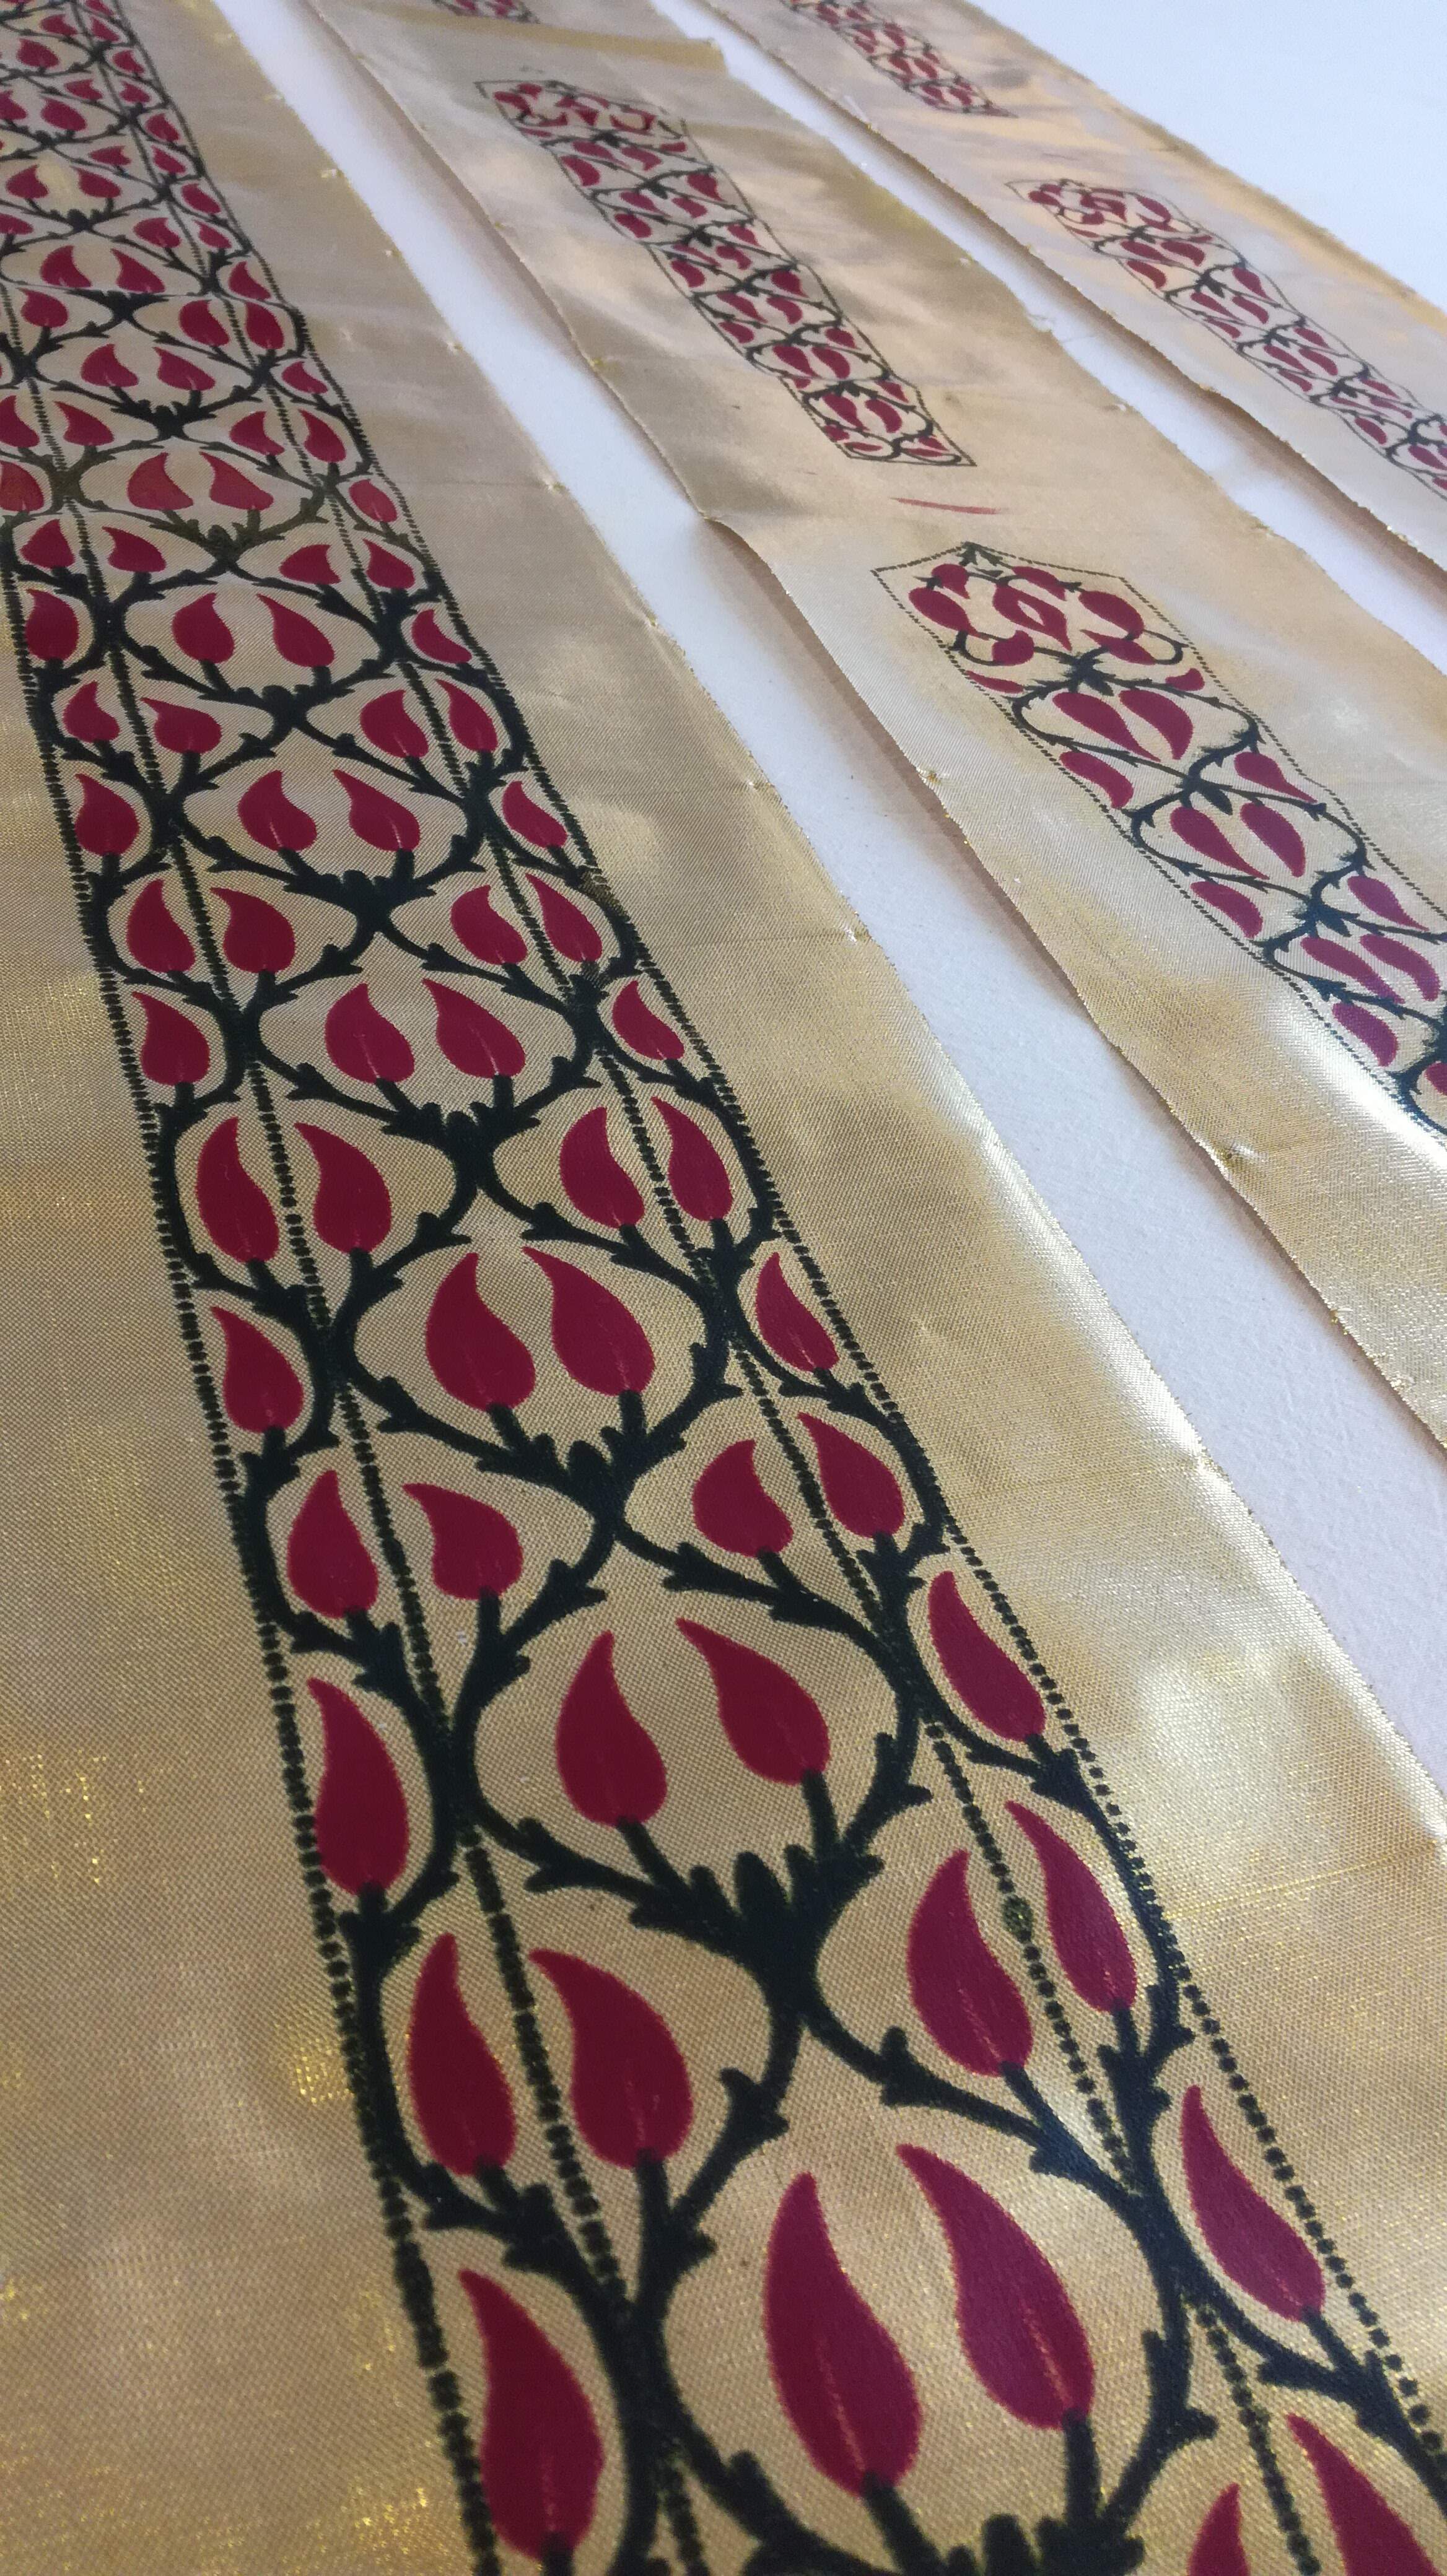 Detail of the gold screenprinted trim of the 17th century Indian Jama.